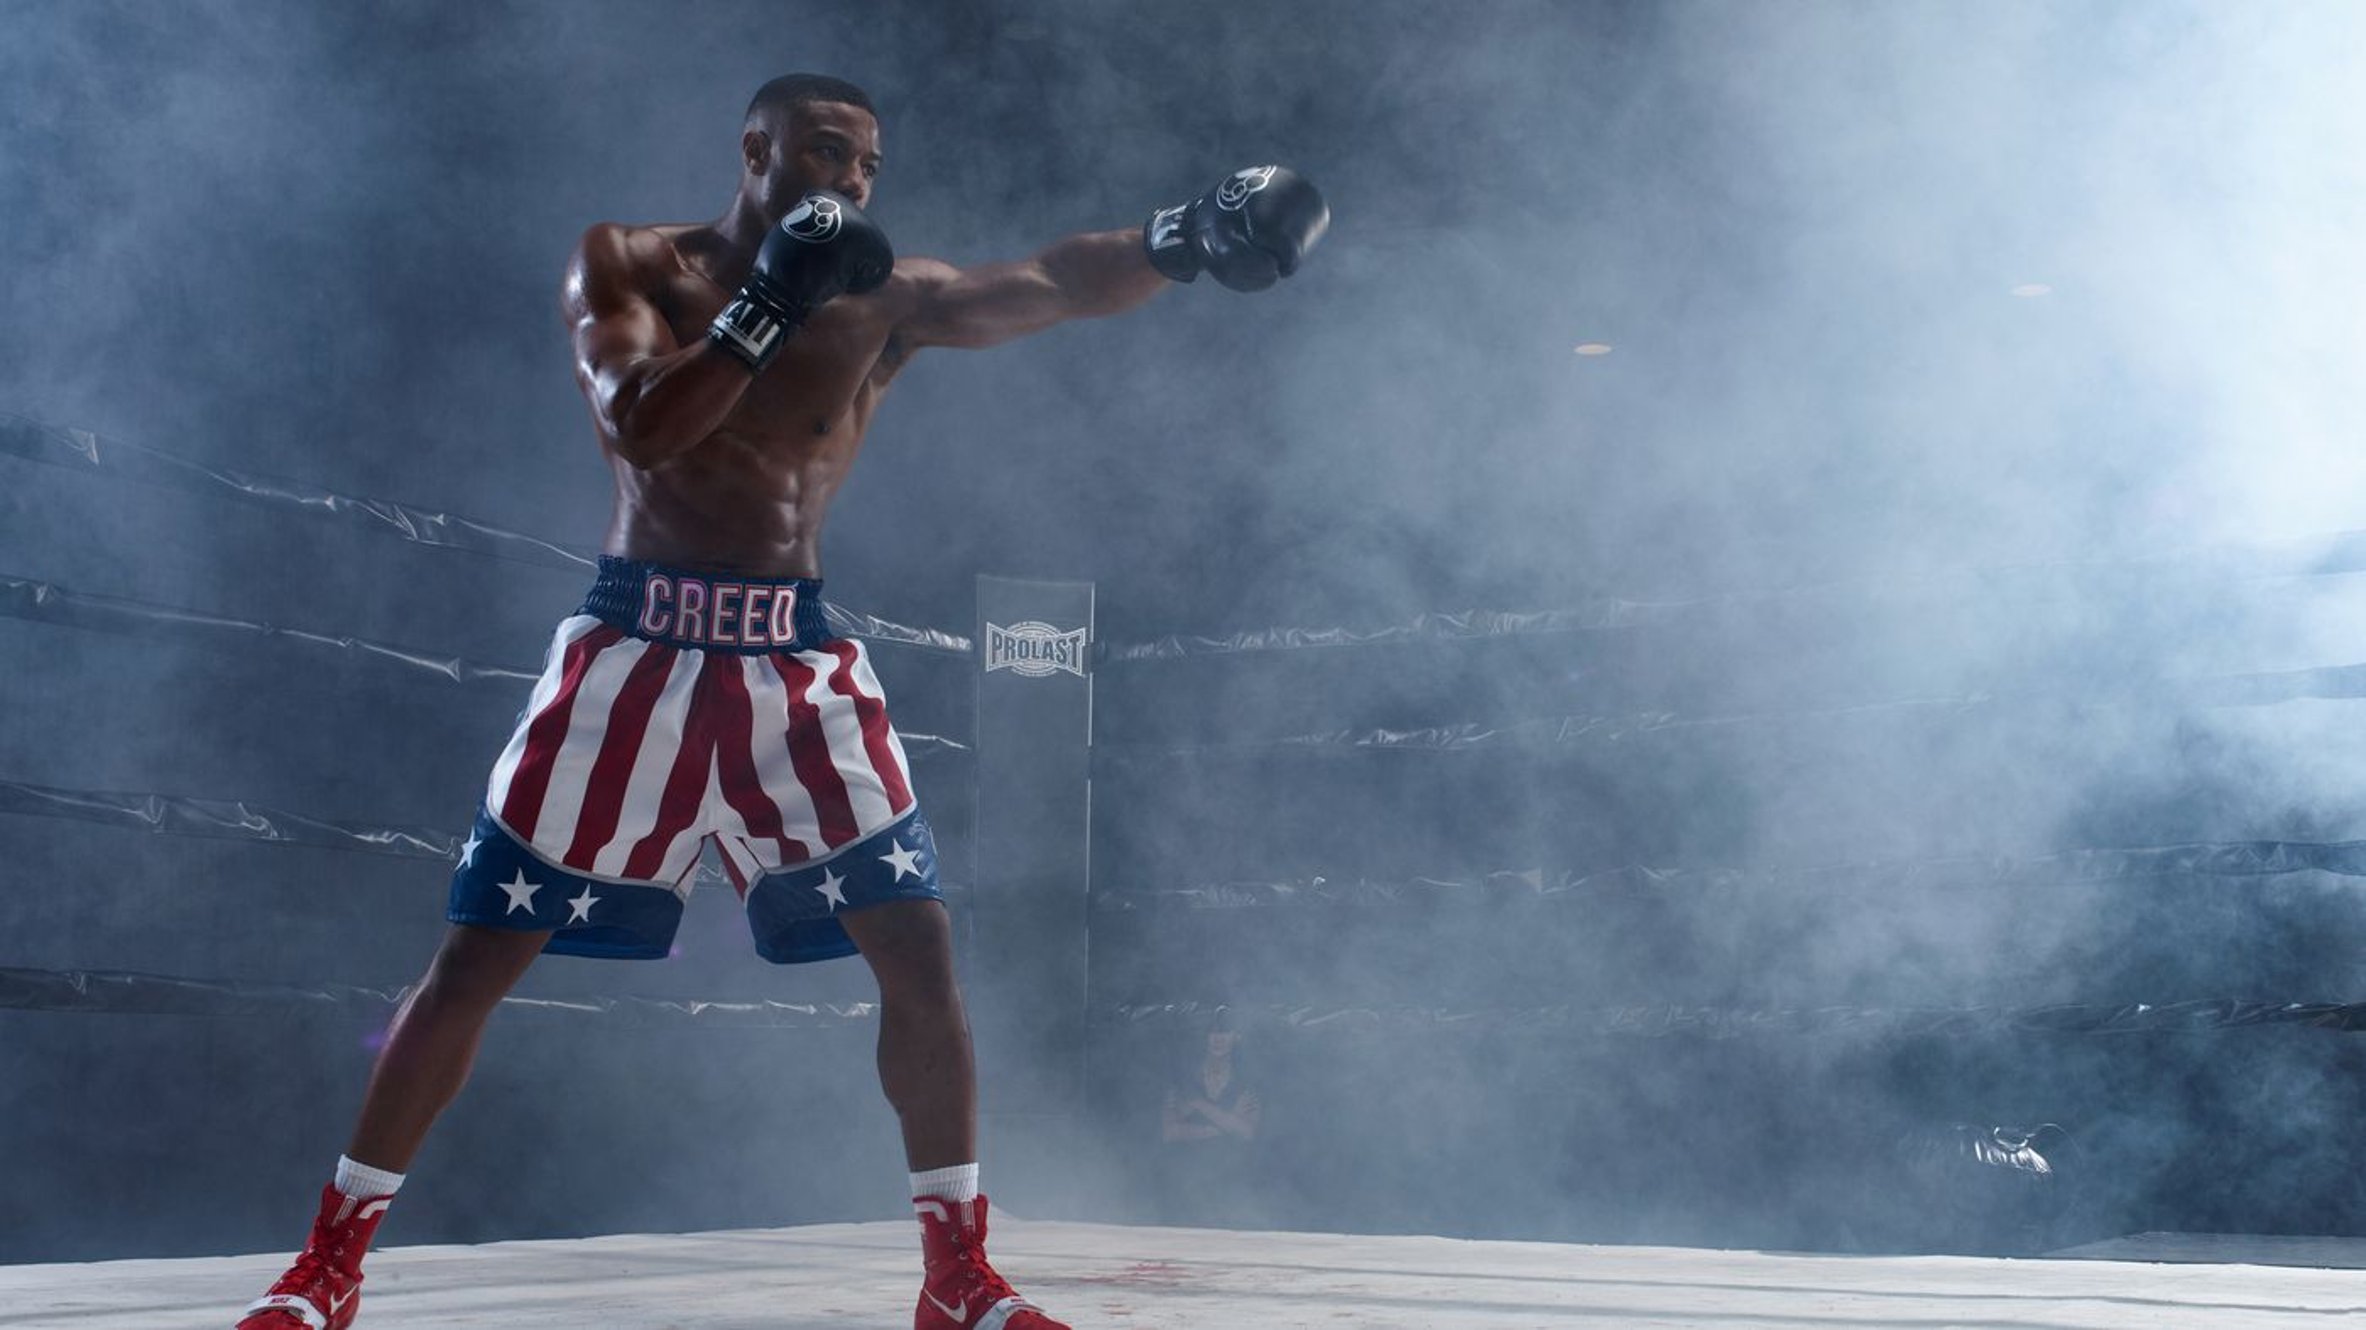 'CREED III' Boxing Fight Fans